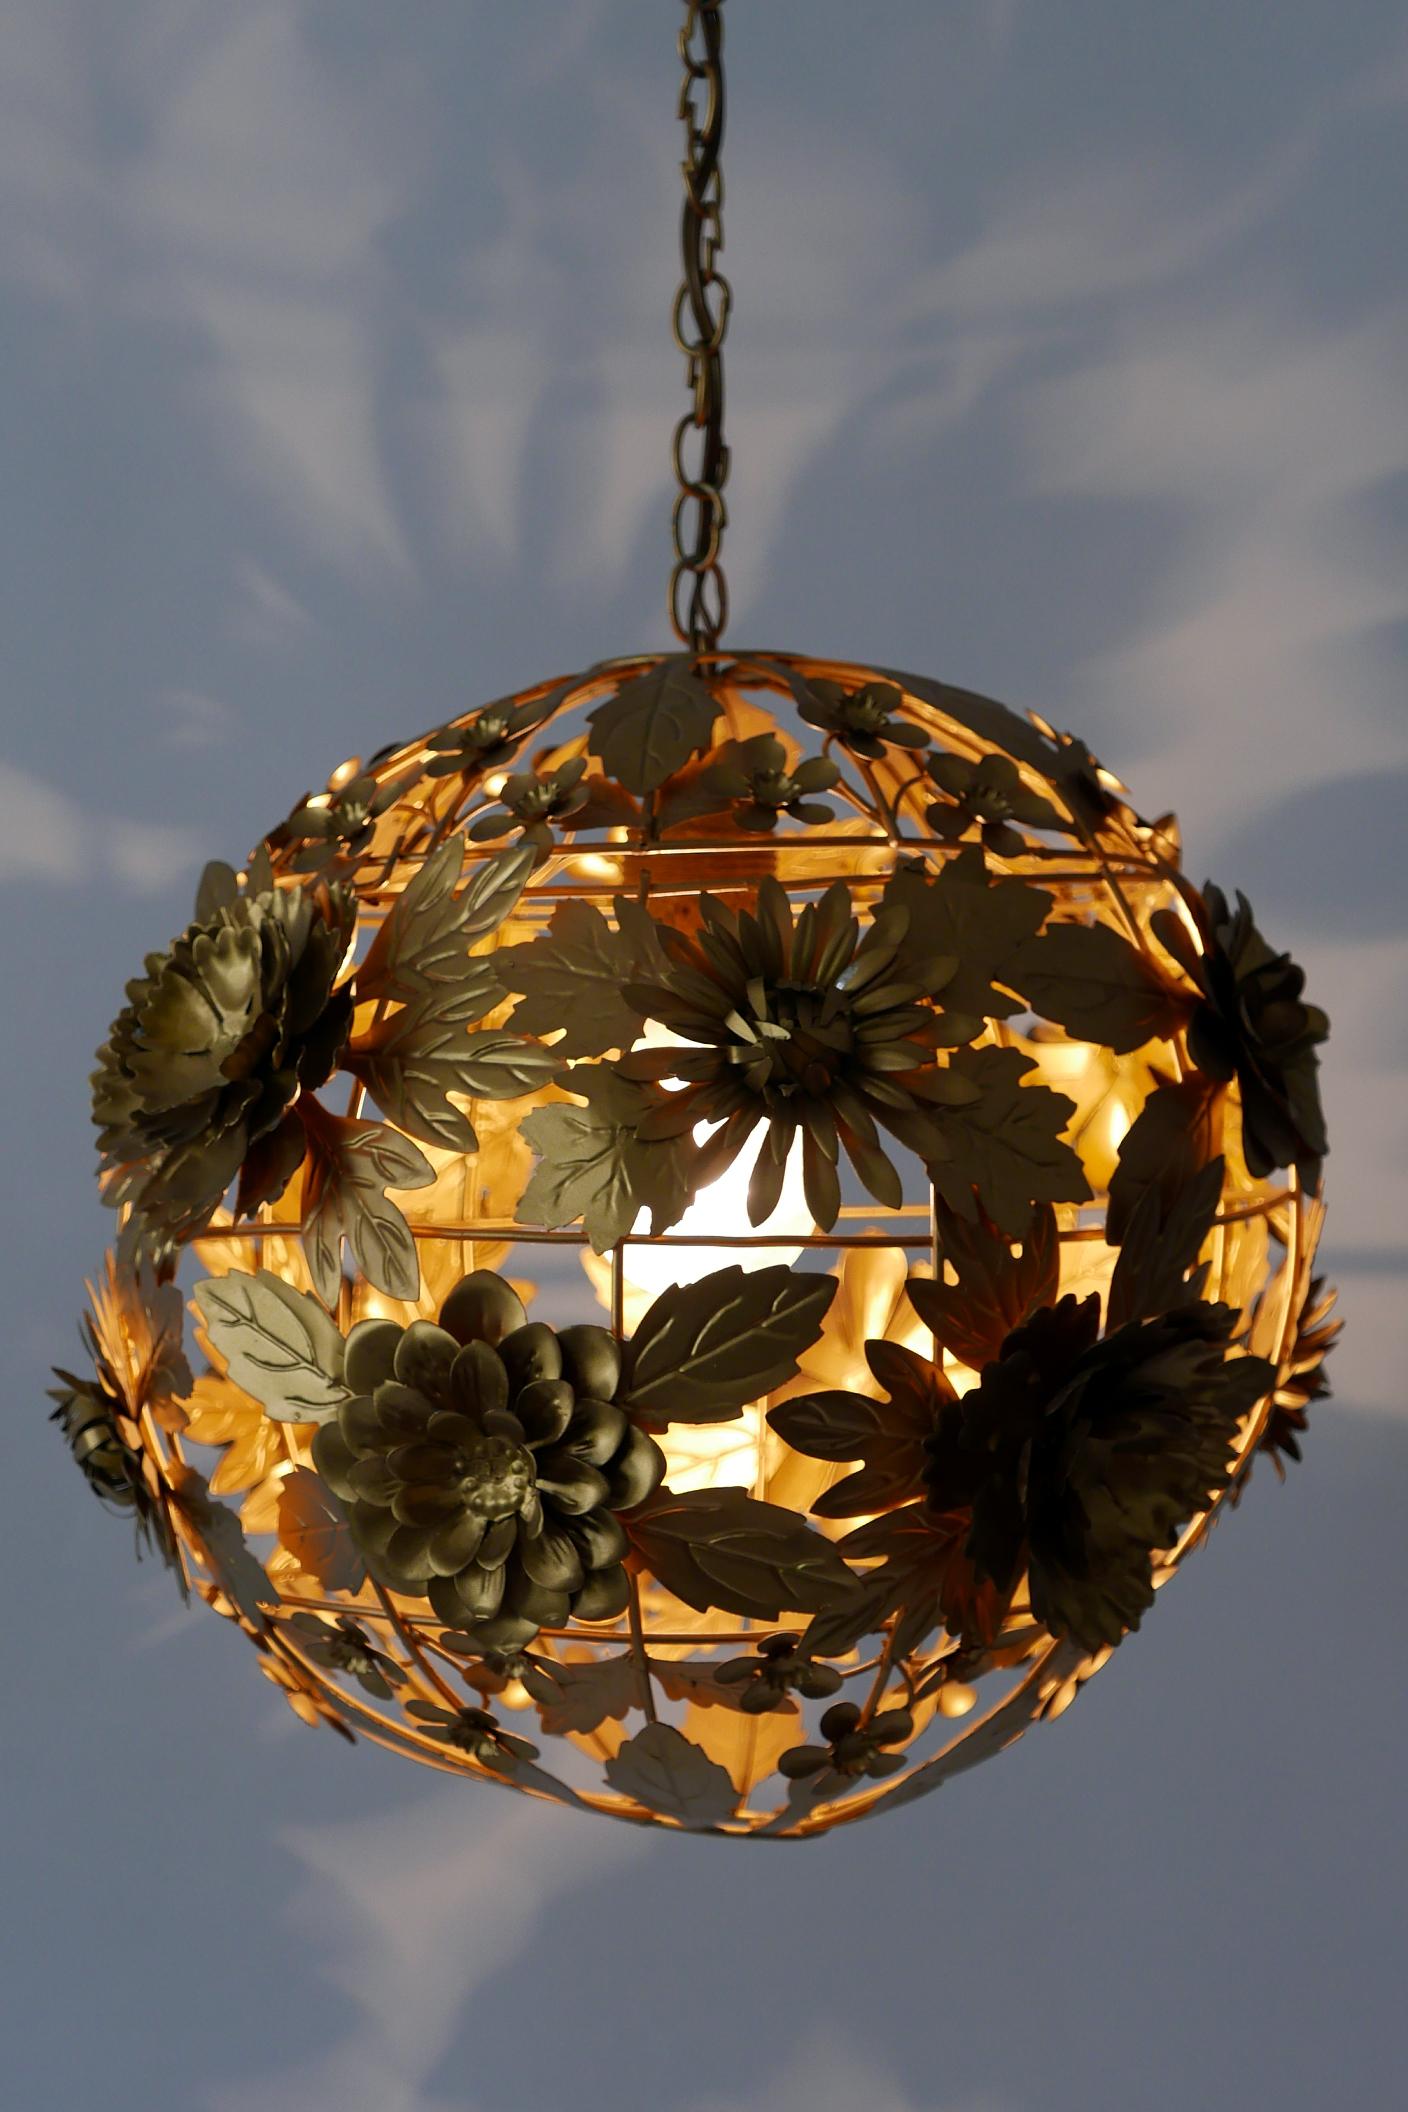 Amazing and highly decorative Mid-Century Modern gilt metal floral pendant lamp. Manufactured in Germany, 1960s.

Executed in flower shaped gilt metal, the pendant lamp needs 1 x E27 / E26 screw fit bulb. It works both with 110 / 230 Volt.

Good